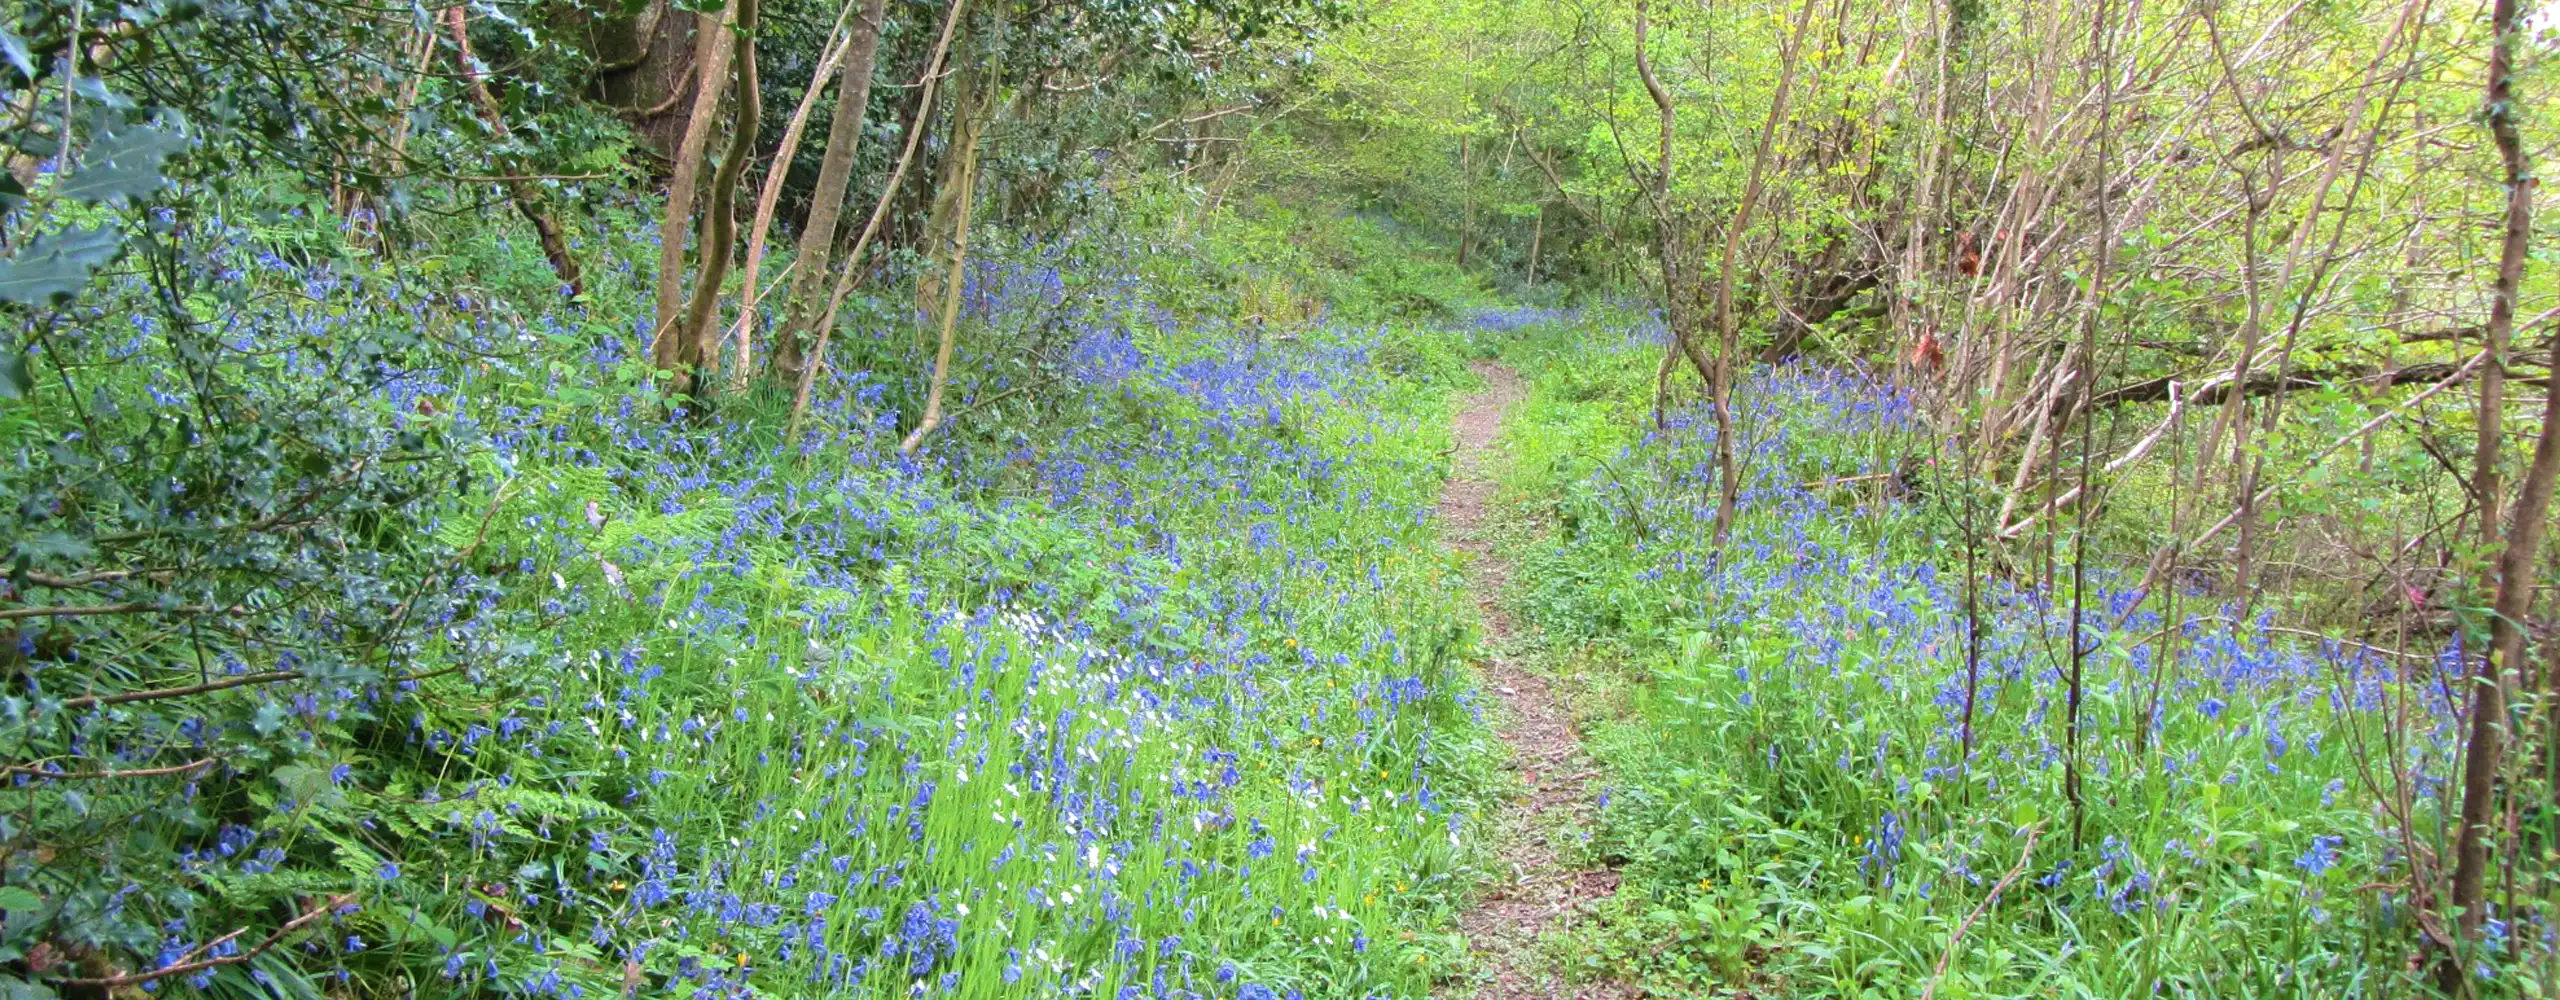 Explore the Bluebell woods